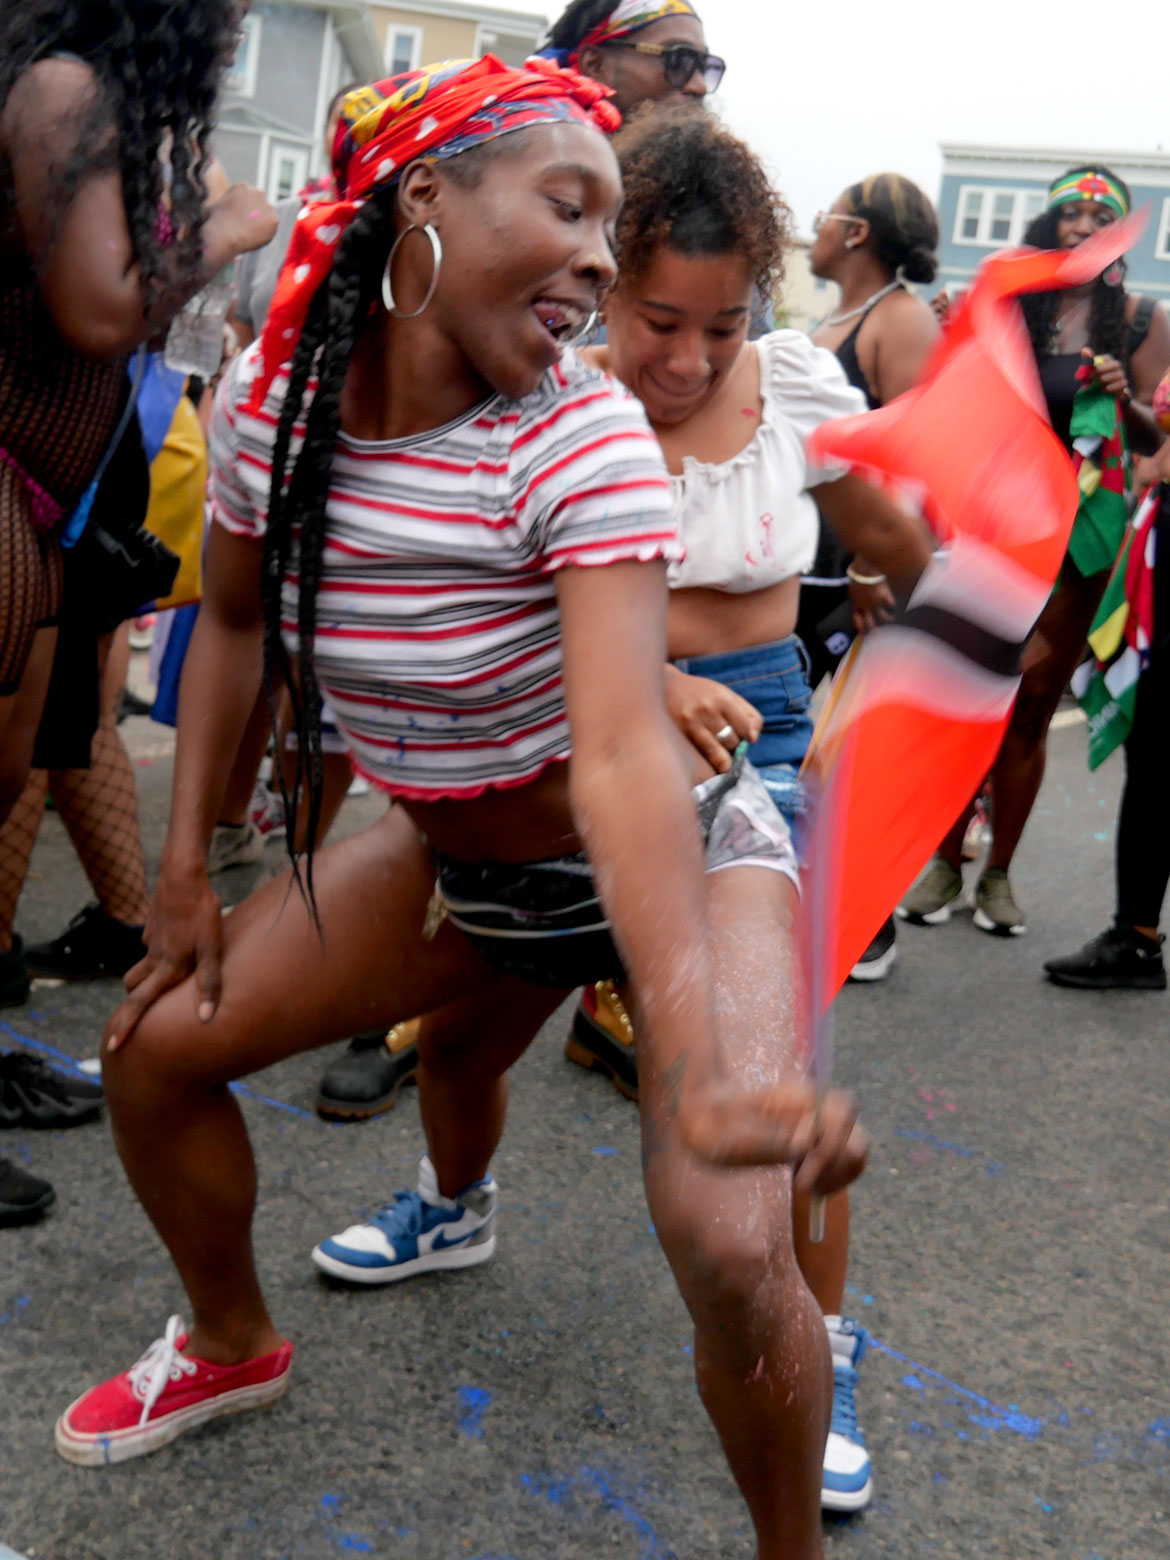 J’Ouvert dawn parade during Boston’s Caribbean-American Carnival, Aug. 26, 2013. (©Greg Cook photo)